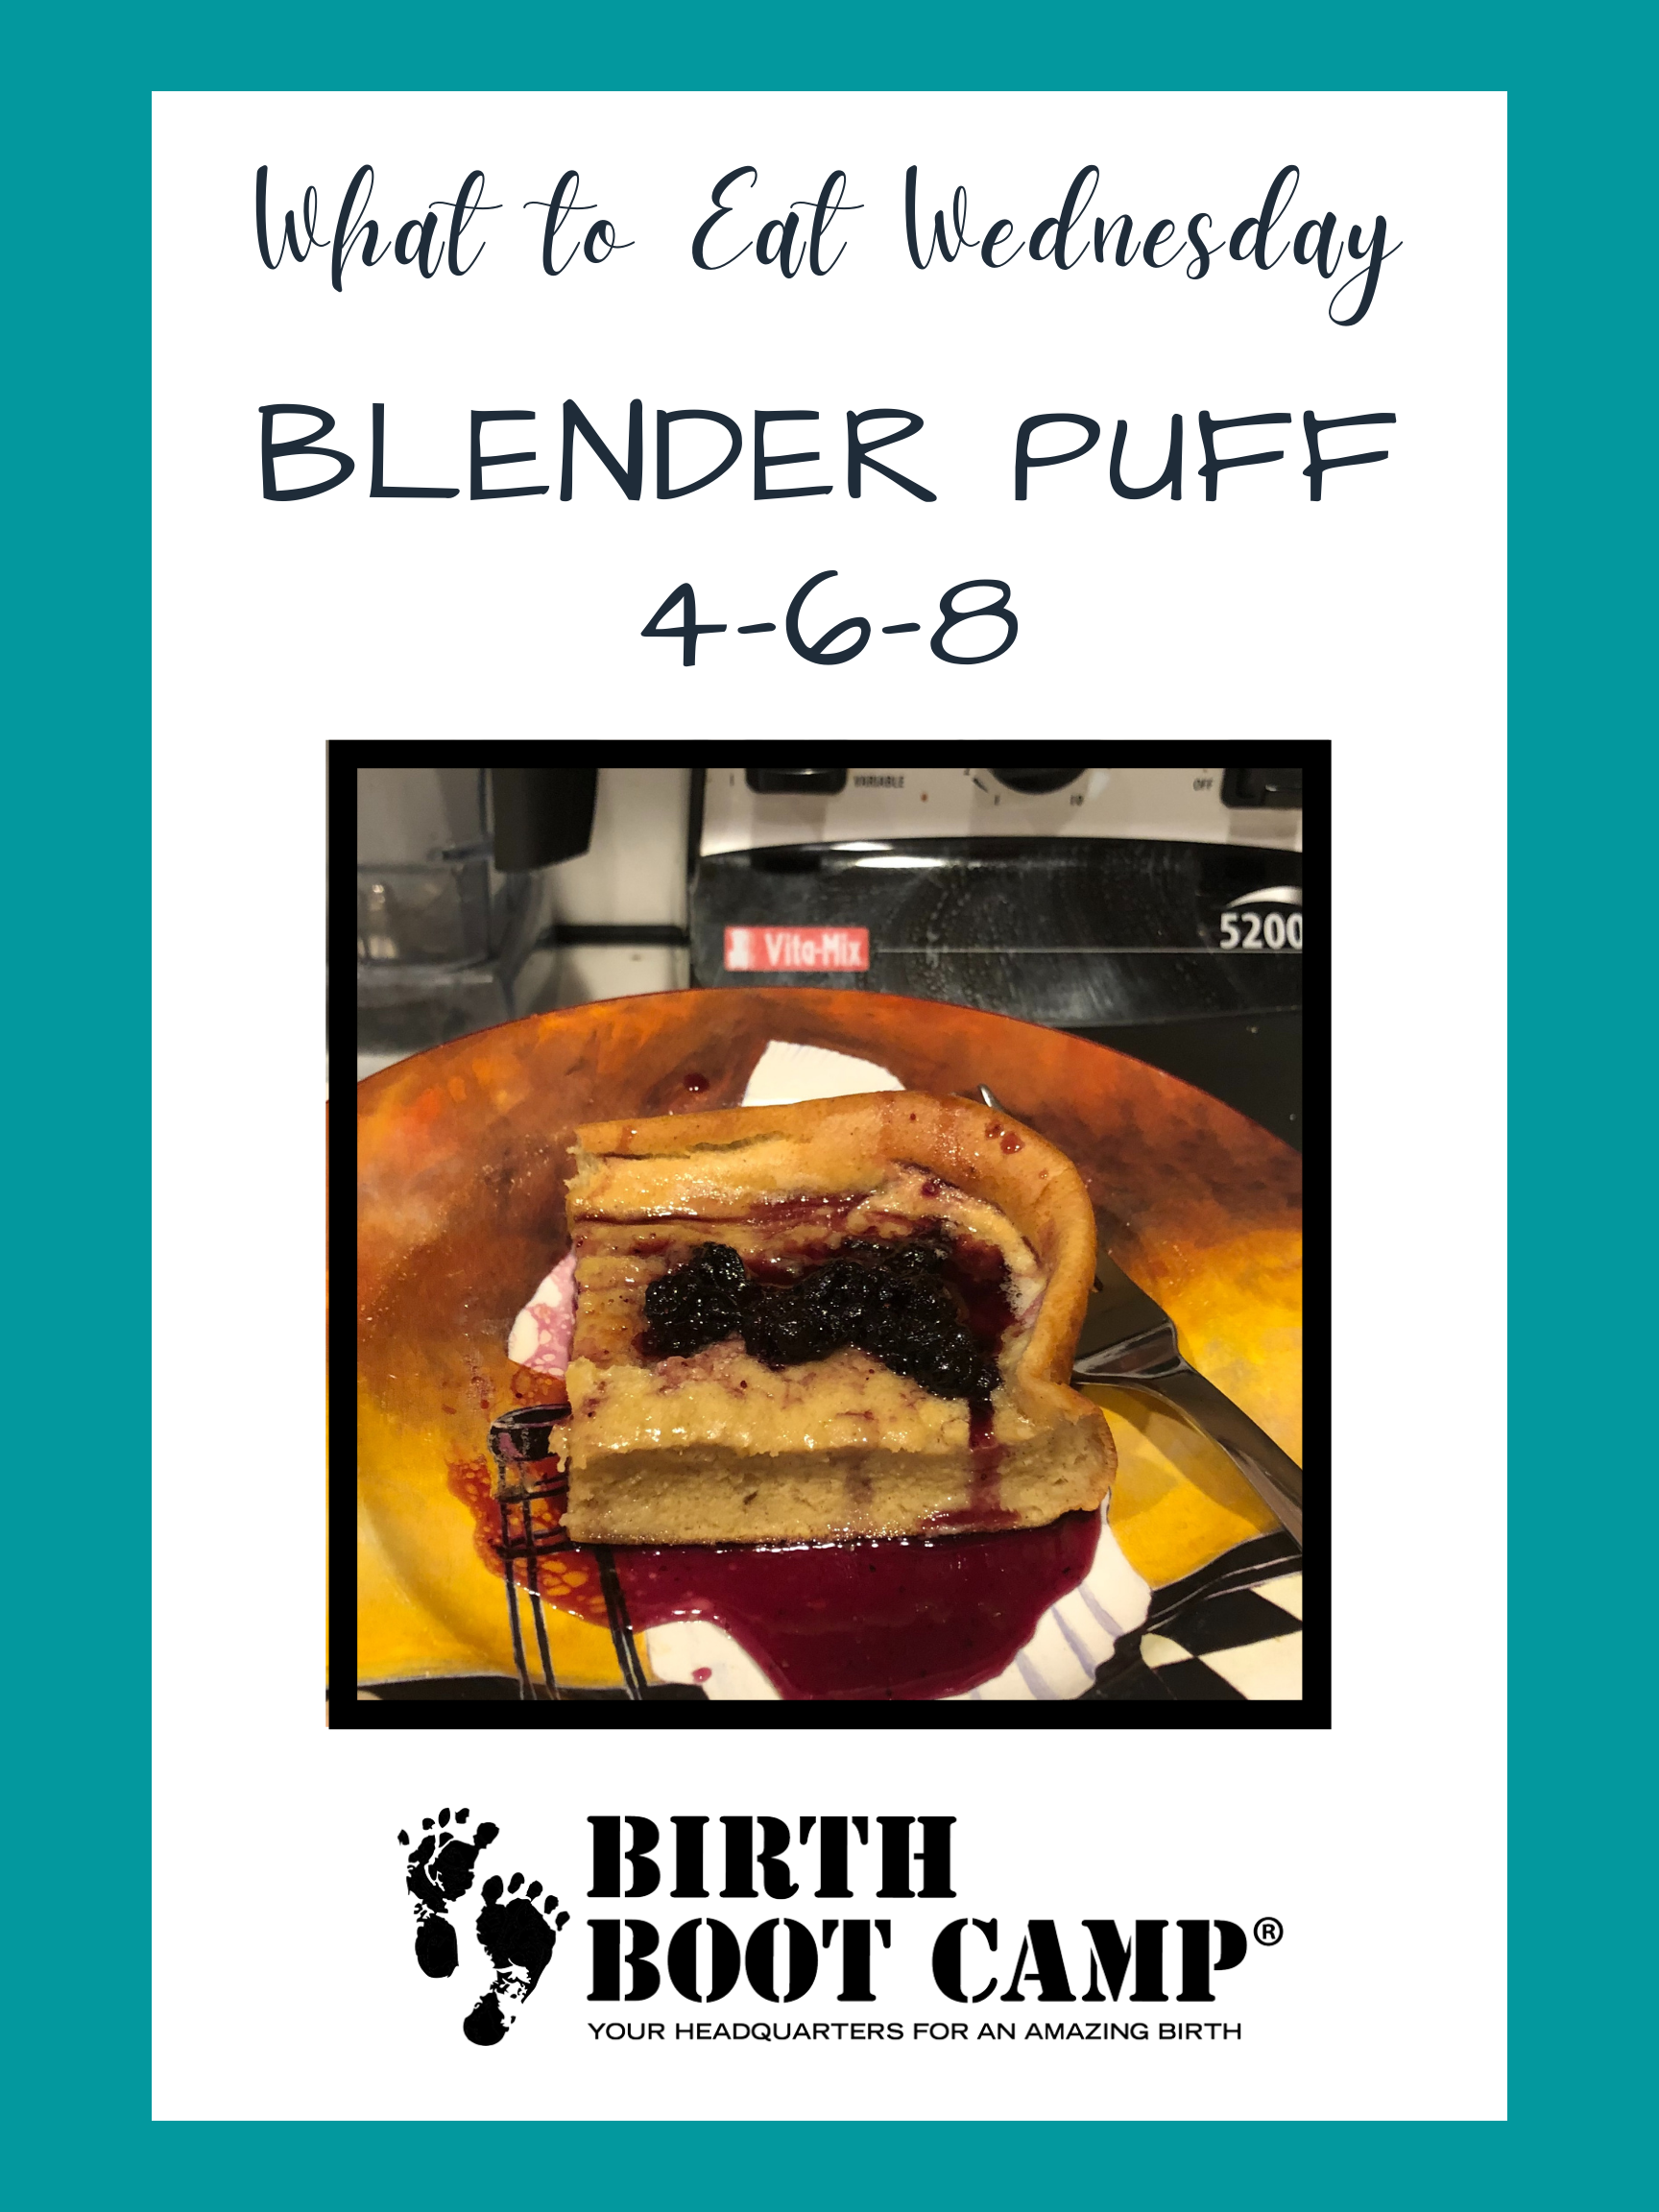 What to Eat Wednesday – Blender Puff 4-6-8